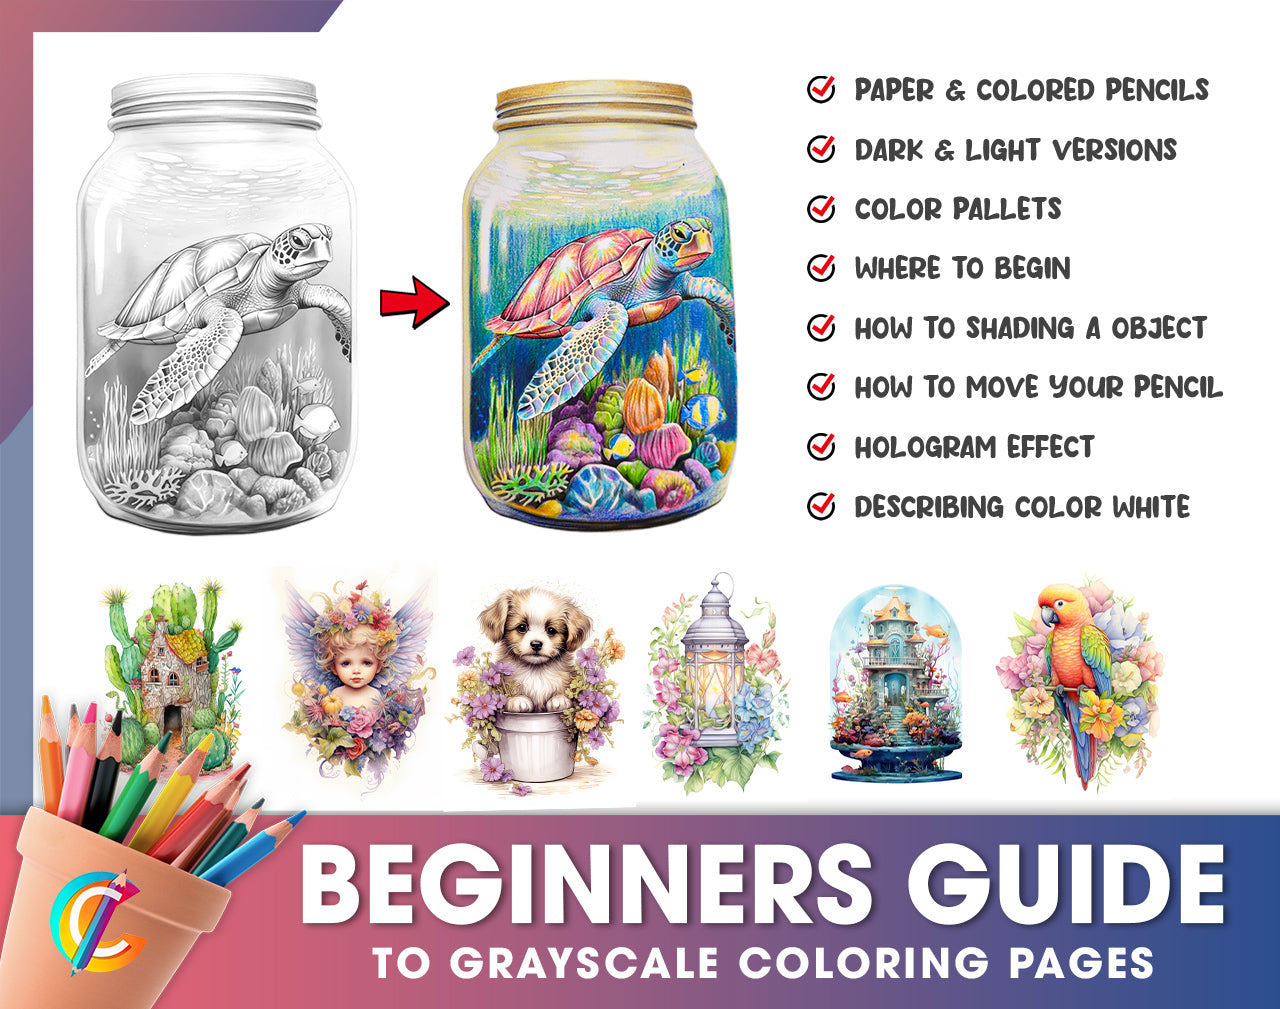 Beginners Guide to Grayscale Coloring Pages - Free Ebook - Printable PDF